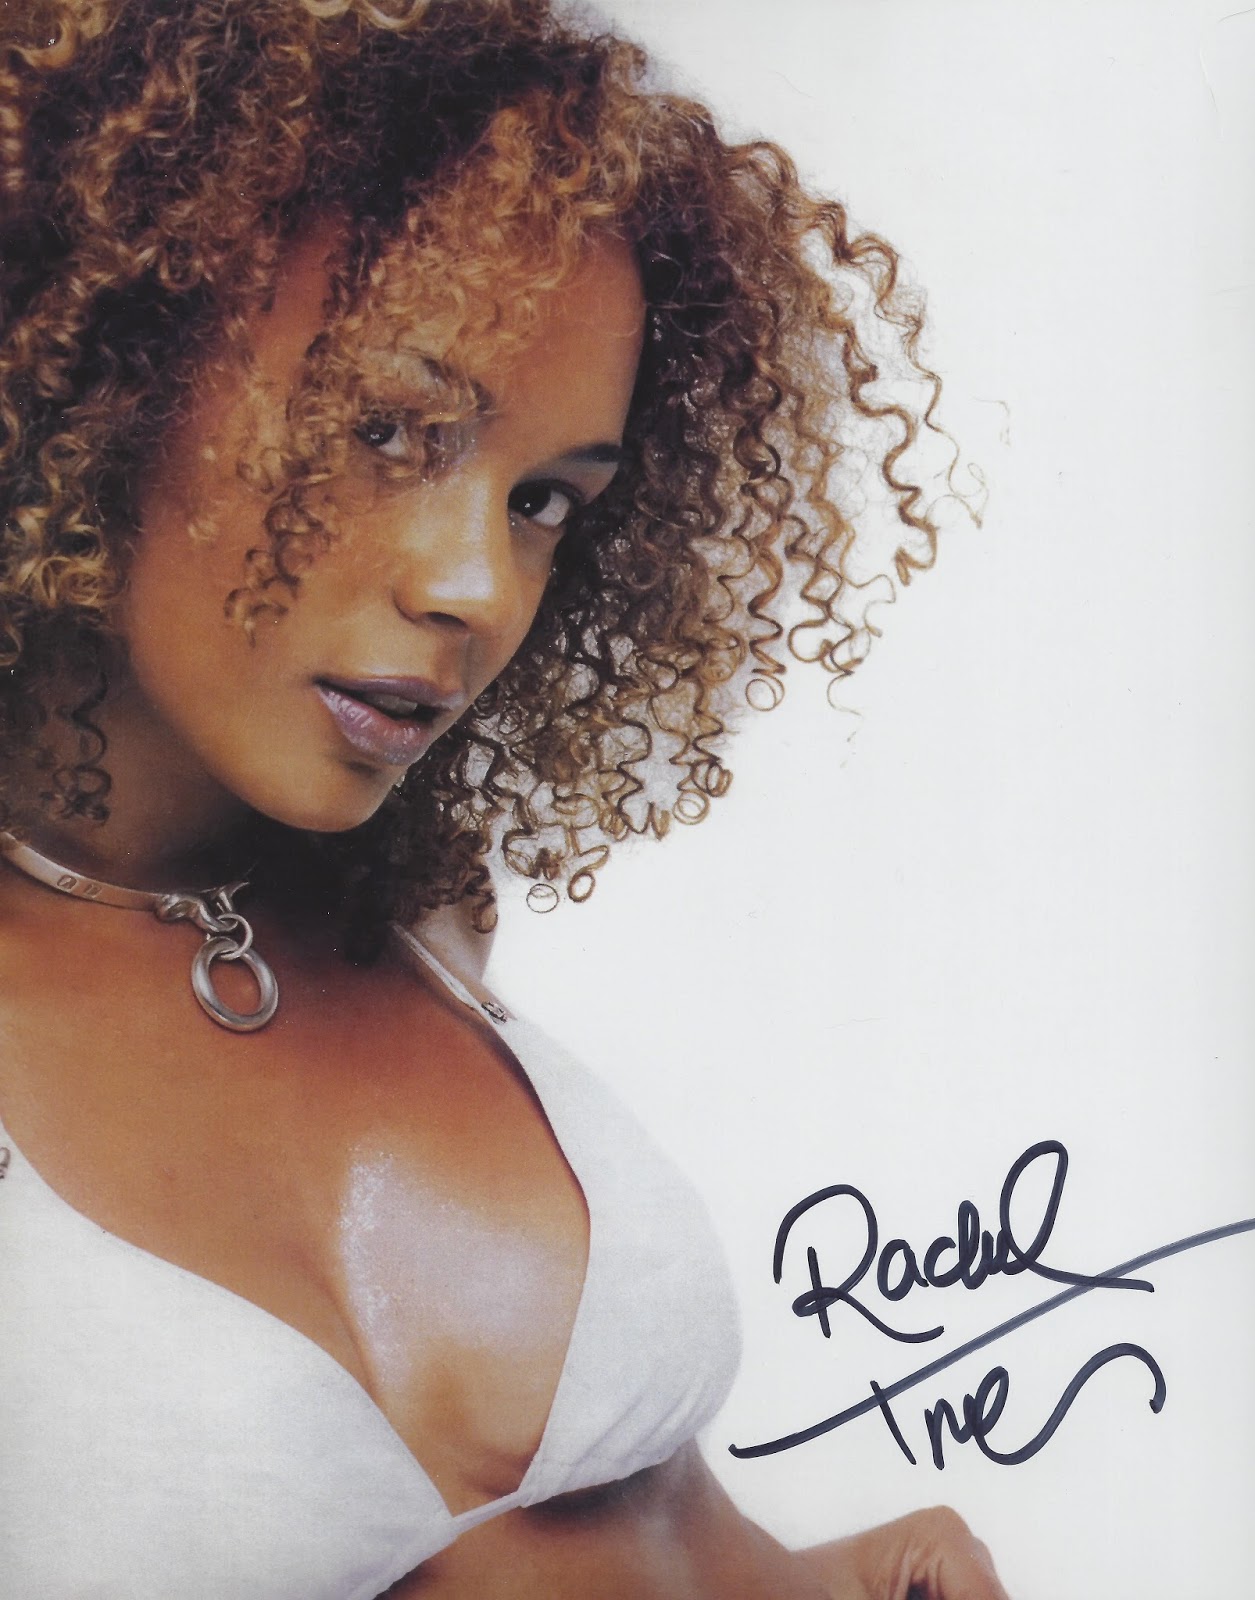 Rachel True. commented on how popular the bikini photos were with the guys....